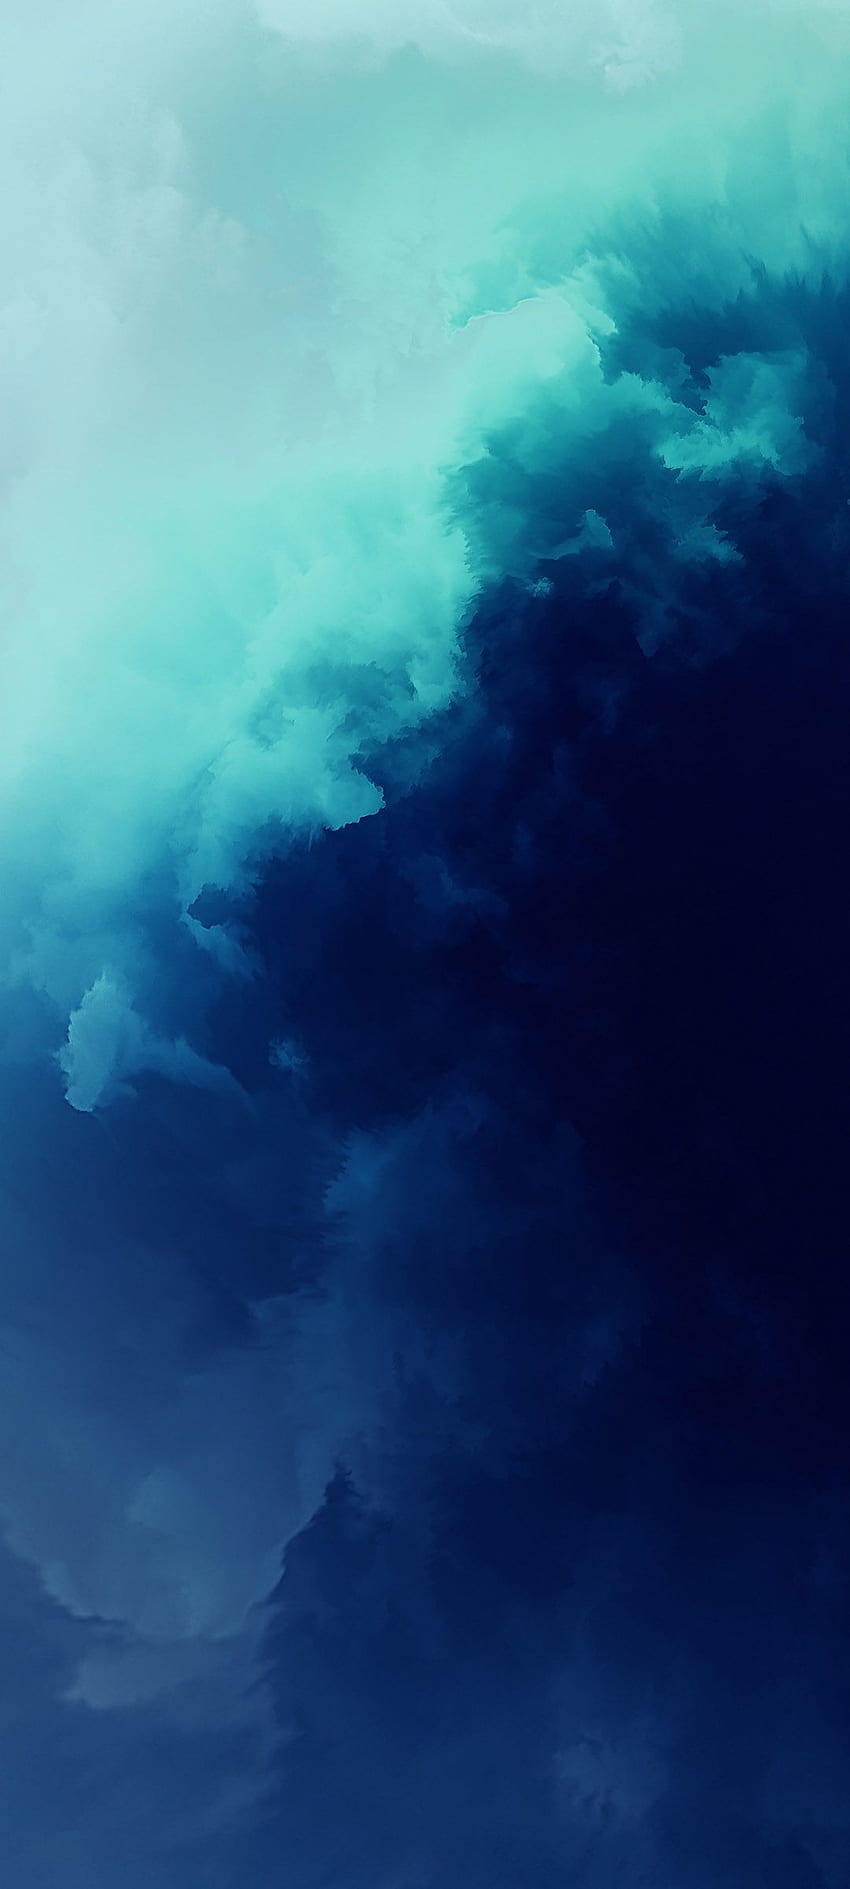 Oneplus 10 pro live wallpapers! (90 fps) link in comments! : r/iWallpaper